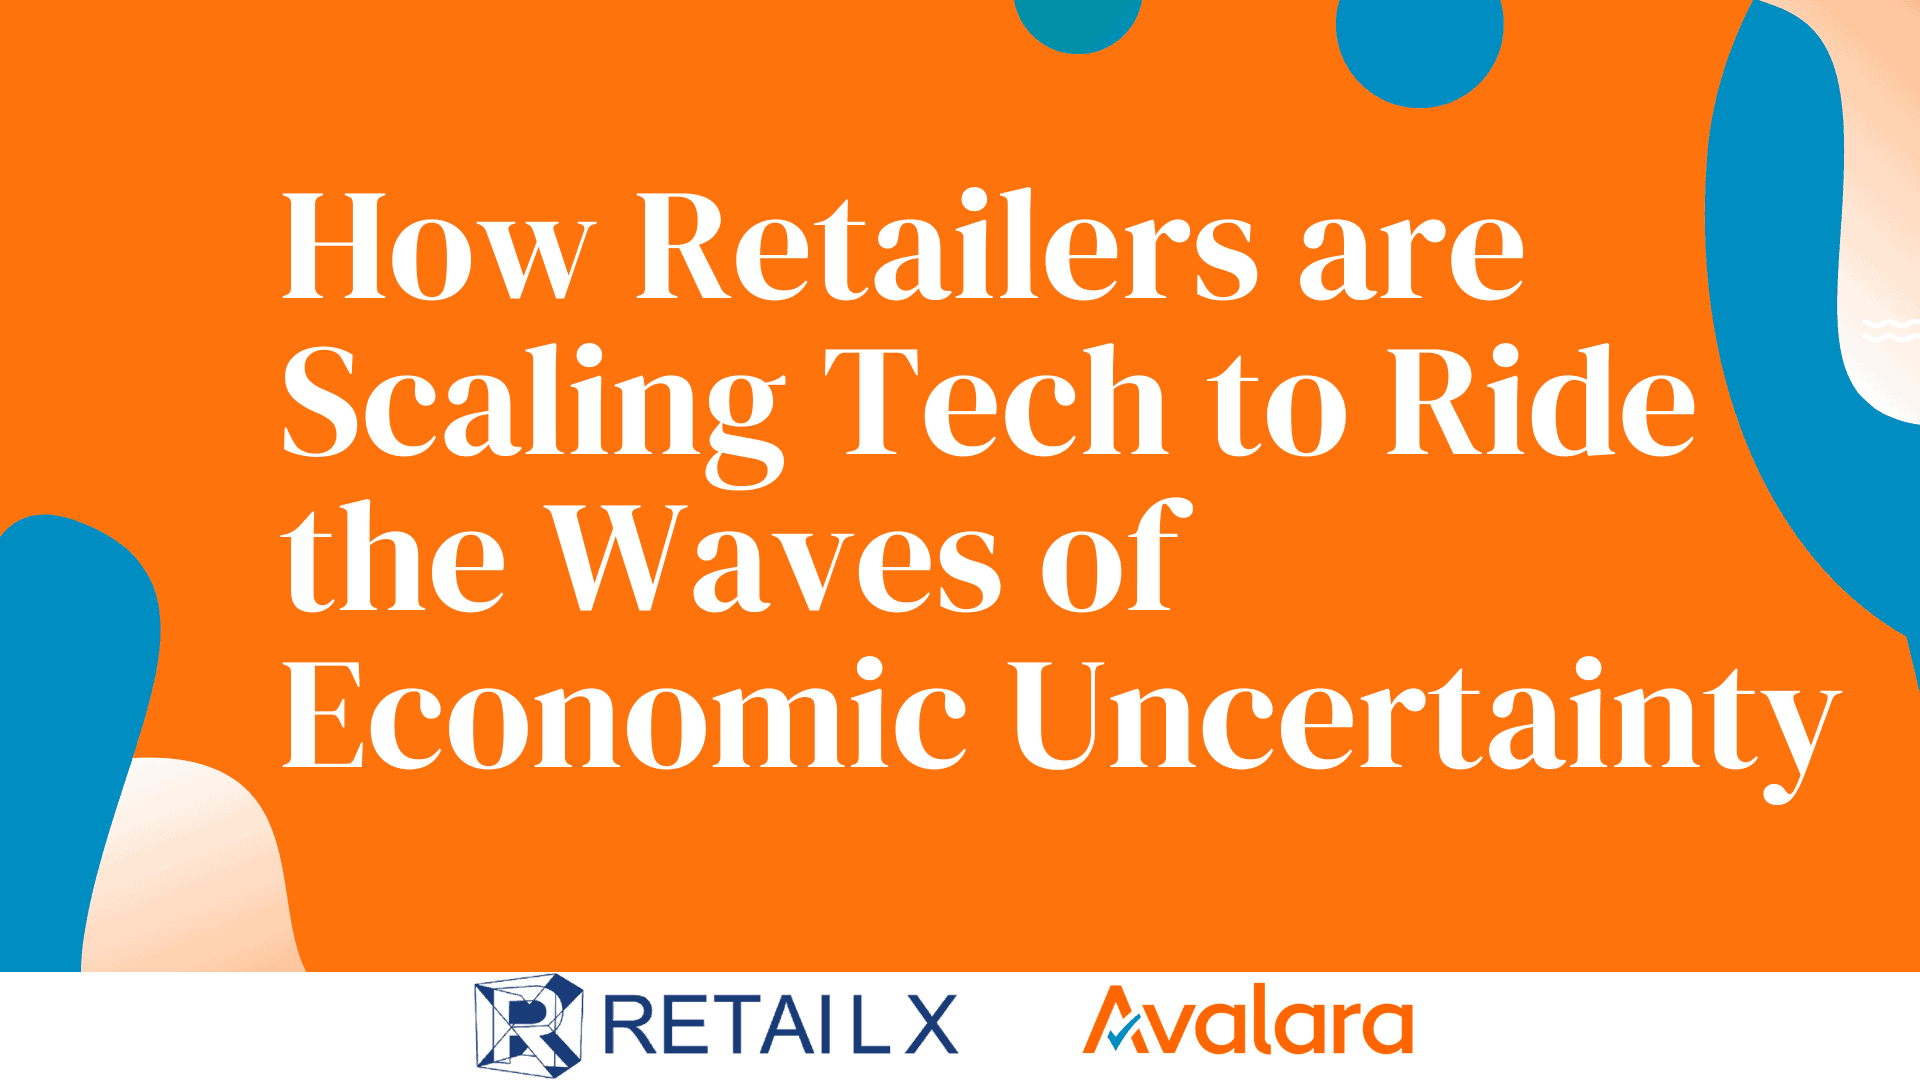 How Retailers are Scaling Tech to Ride the Waves of Economic Uncertainty